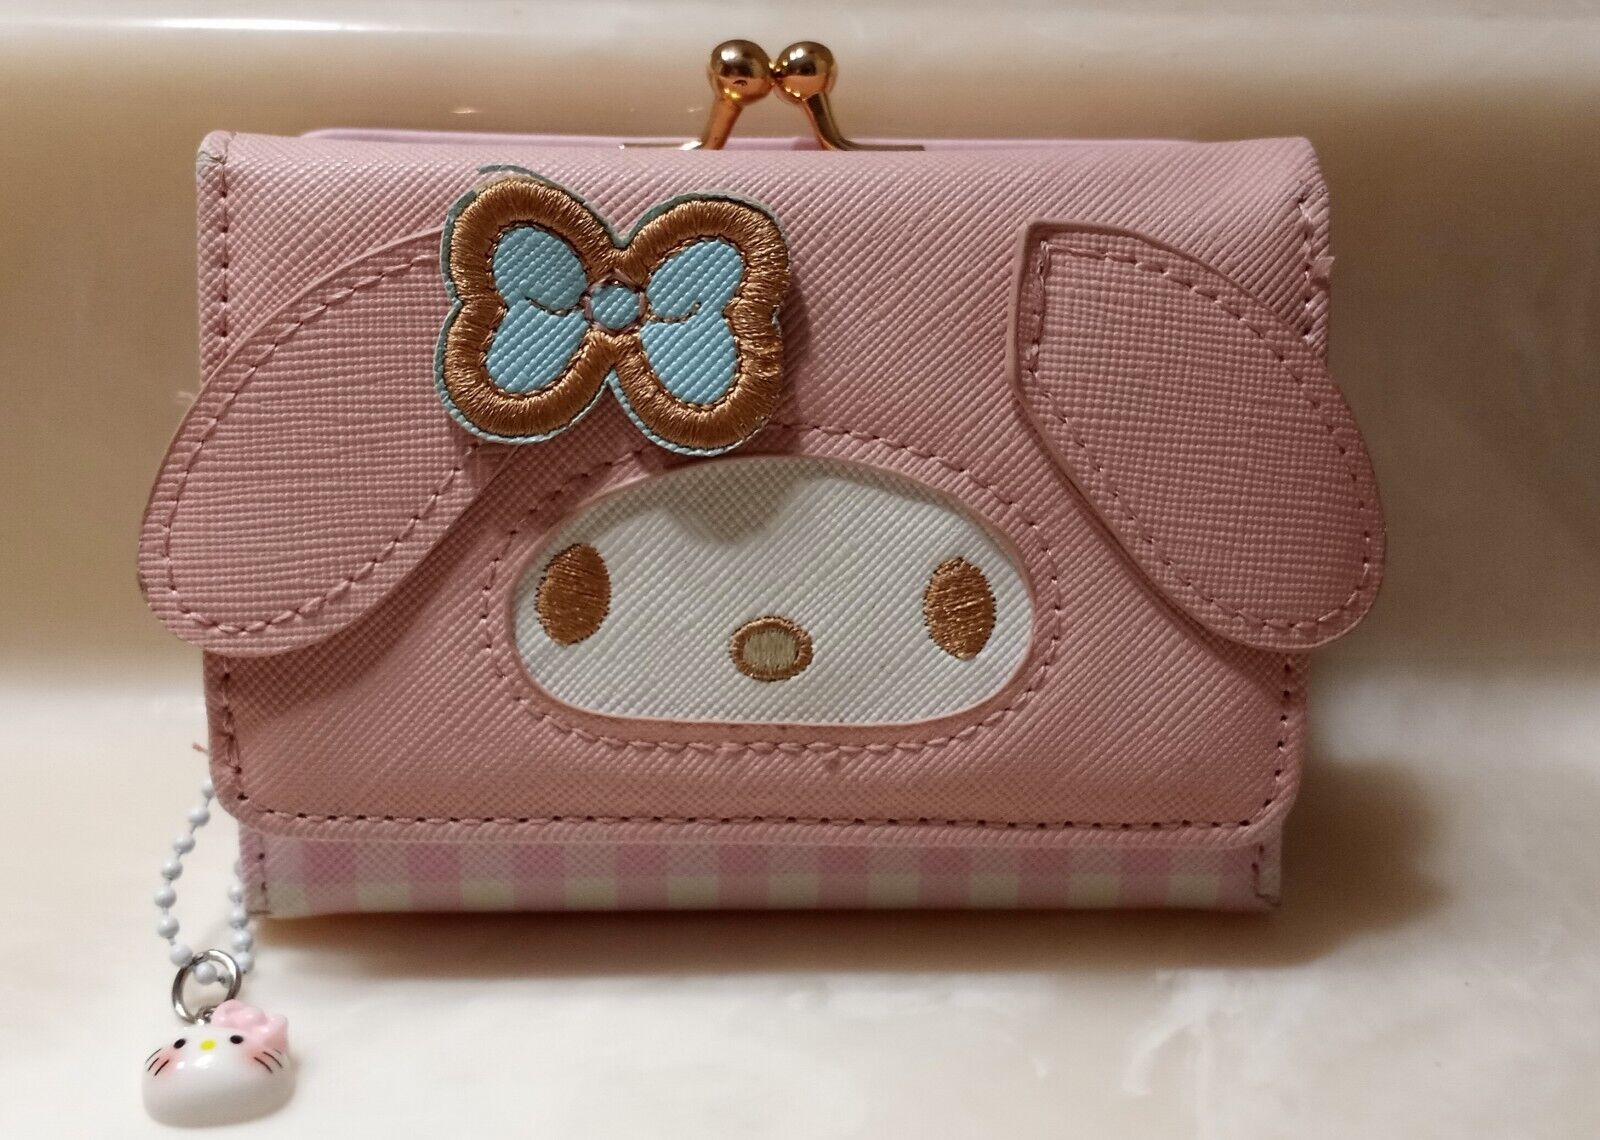 Cute My Melody Pink Leather Card Folding Coin Wallet Clutch Purse